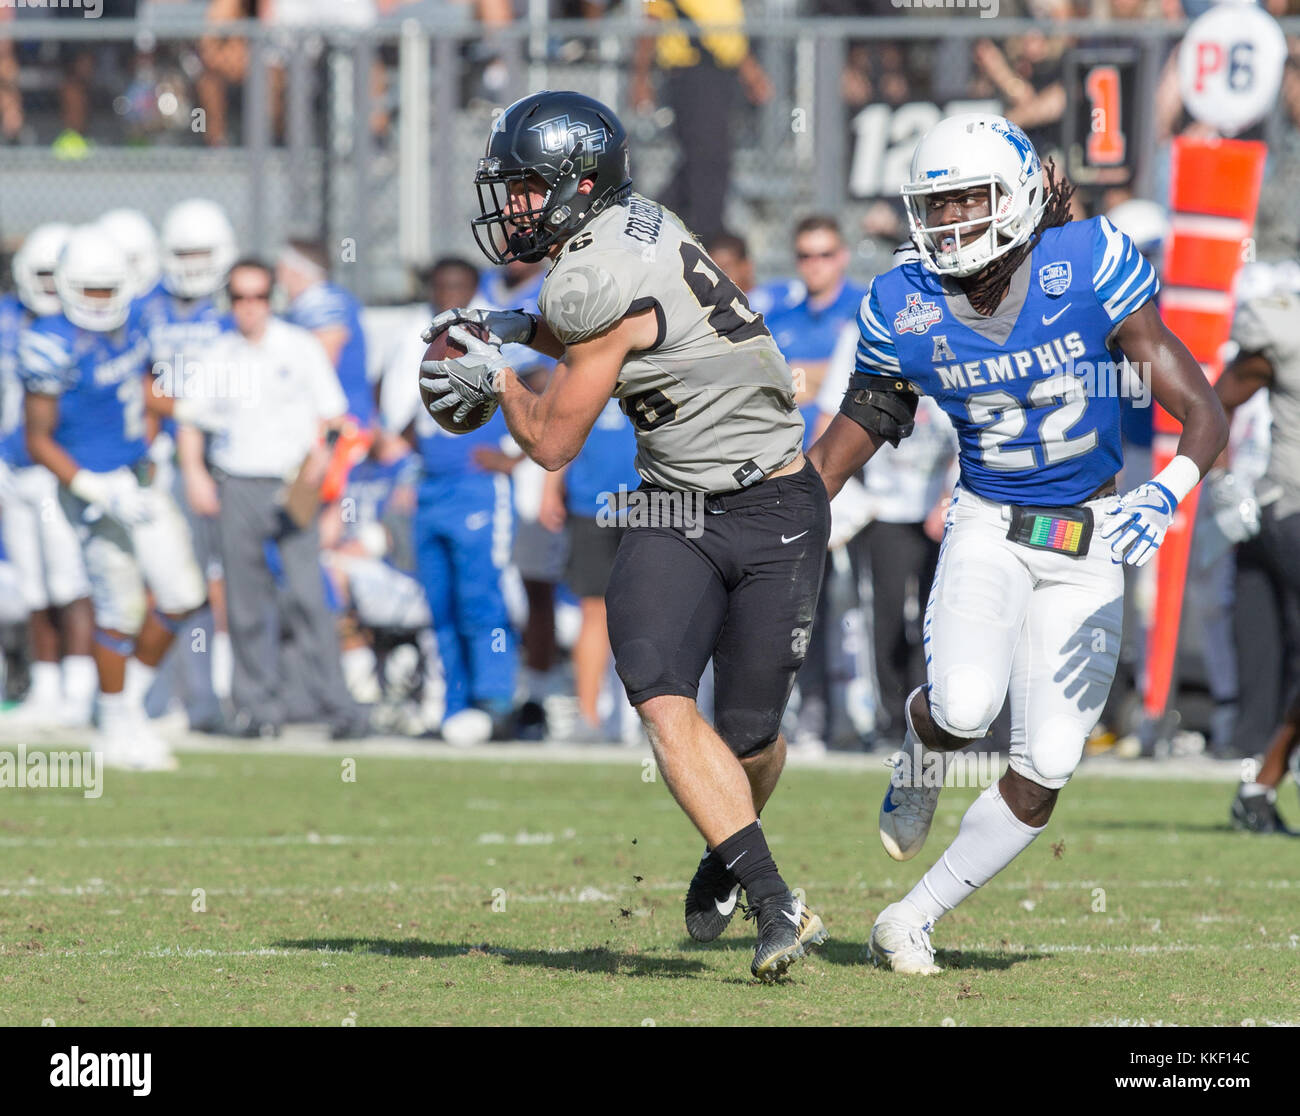 Orlando, FL, USA. 2nd Dec, 2017. UCF TE Michael Colubiale #86 hauls in a pass during during the AAC Championship football game between the UCF Knights and the Memphis Tigers at the Spectrum Stadium in Orlando, FL. Kyle Okita/CSM/Alamy Live News Stock Photo